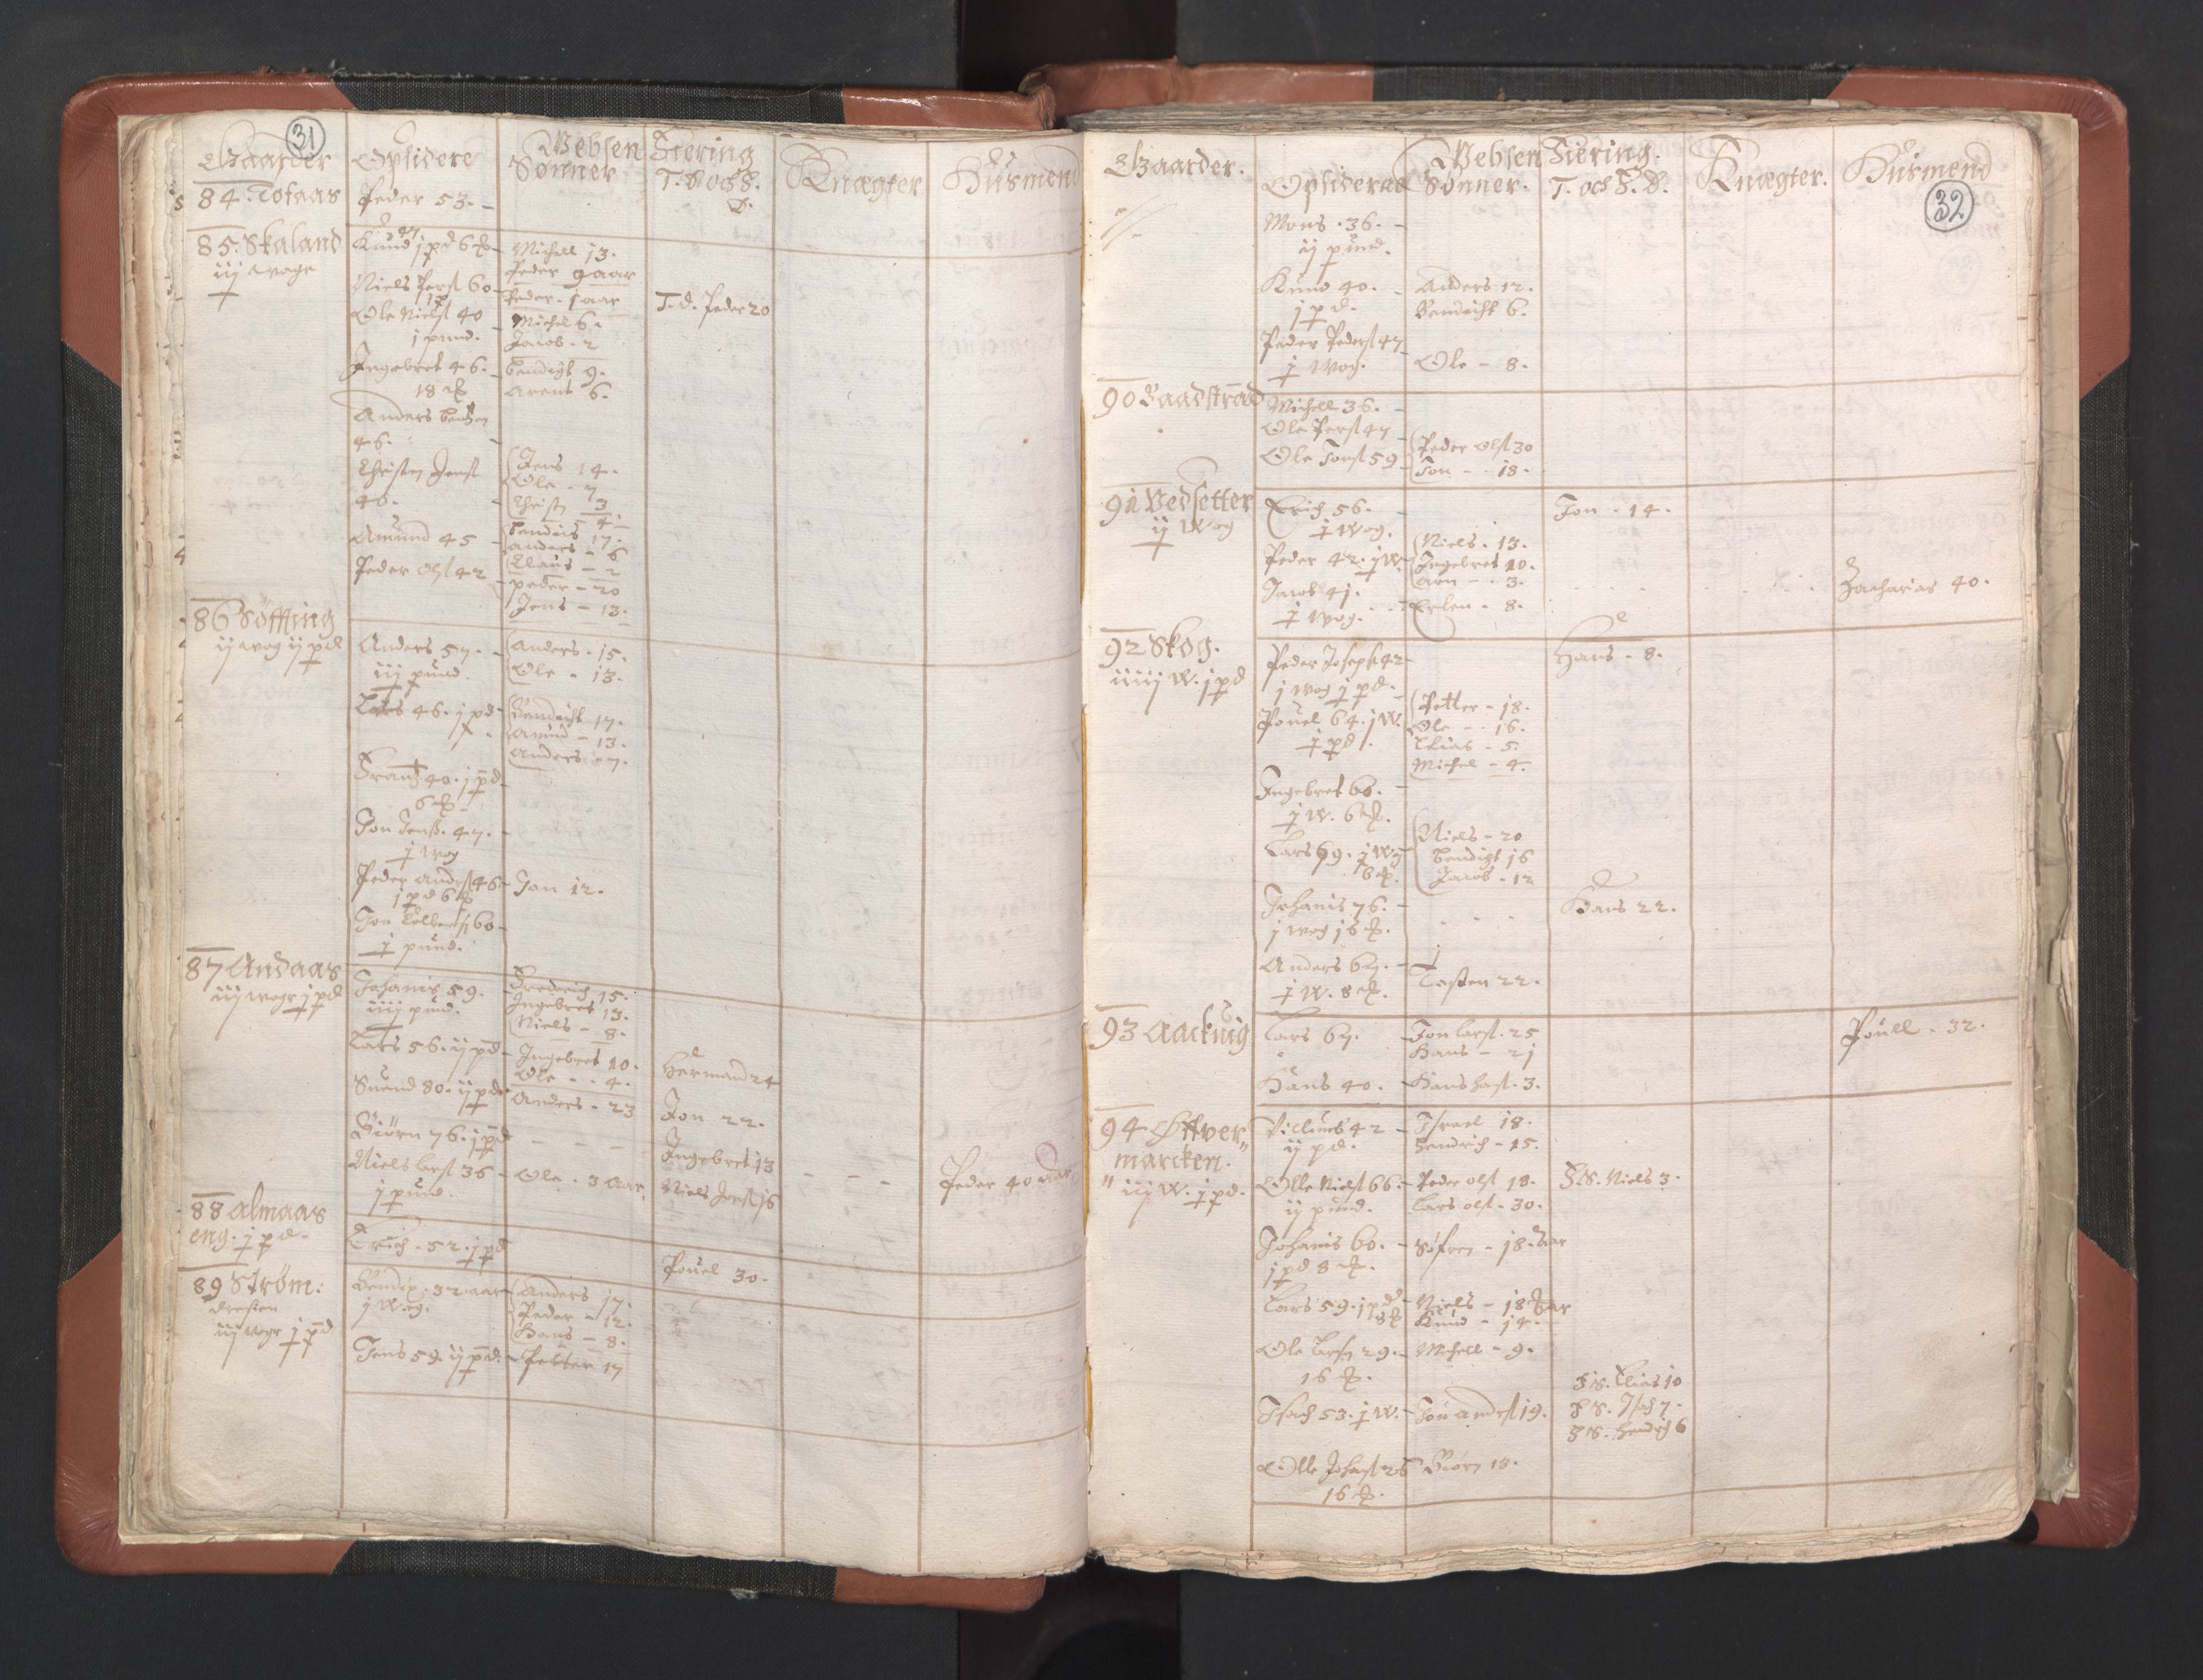 RA, Vicar's Census 1664-1666, no. 35: Helgeland deanery and Salten deanery, 1664-1666, p. 31-32